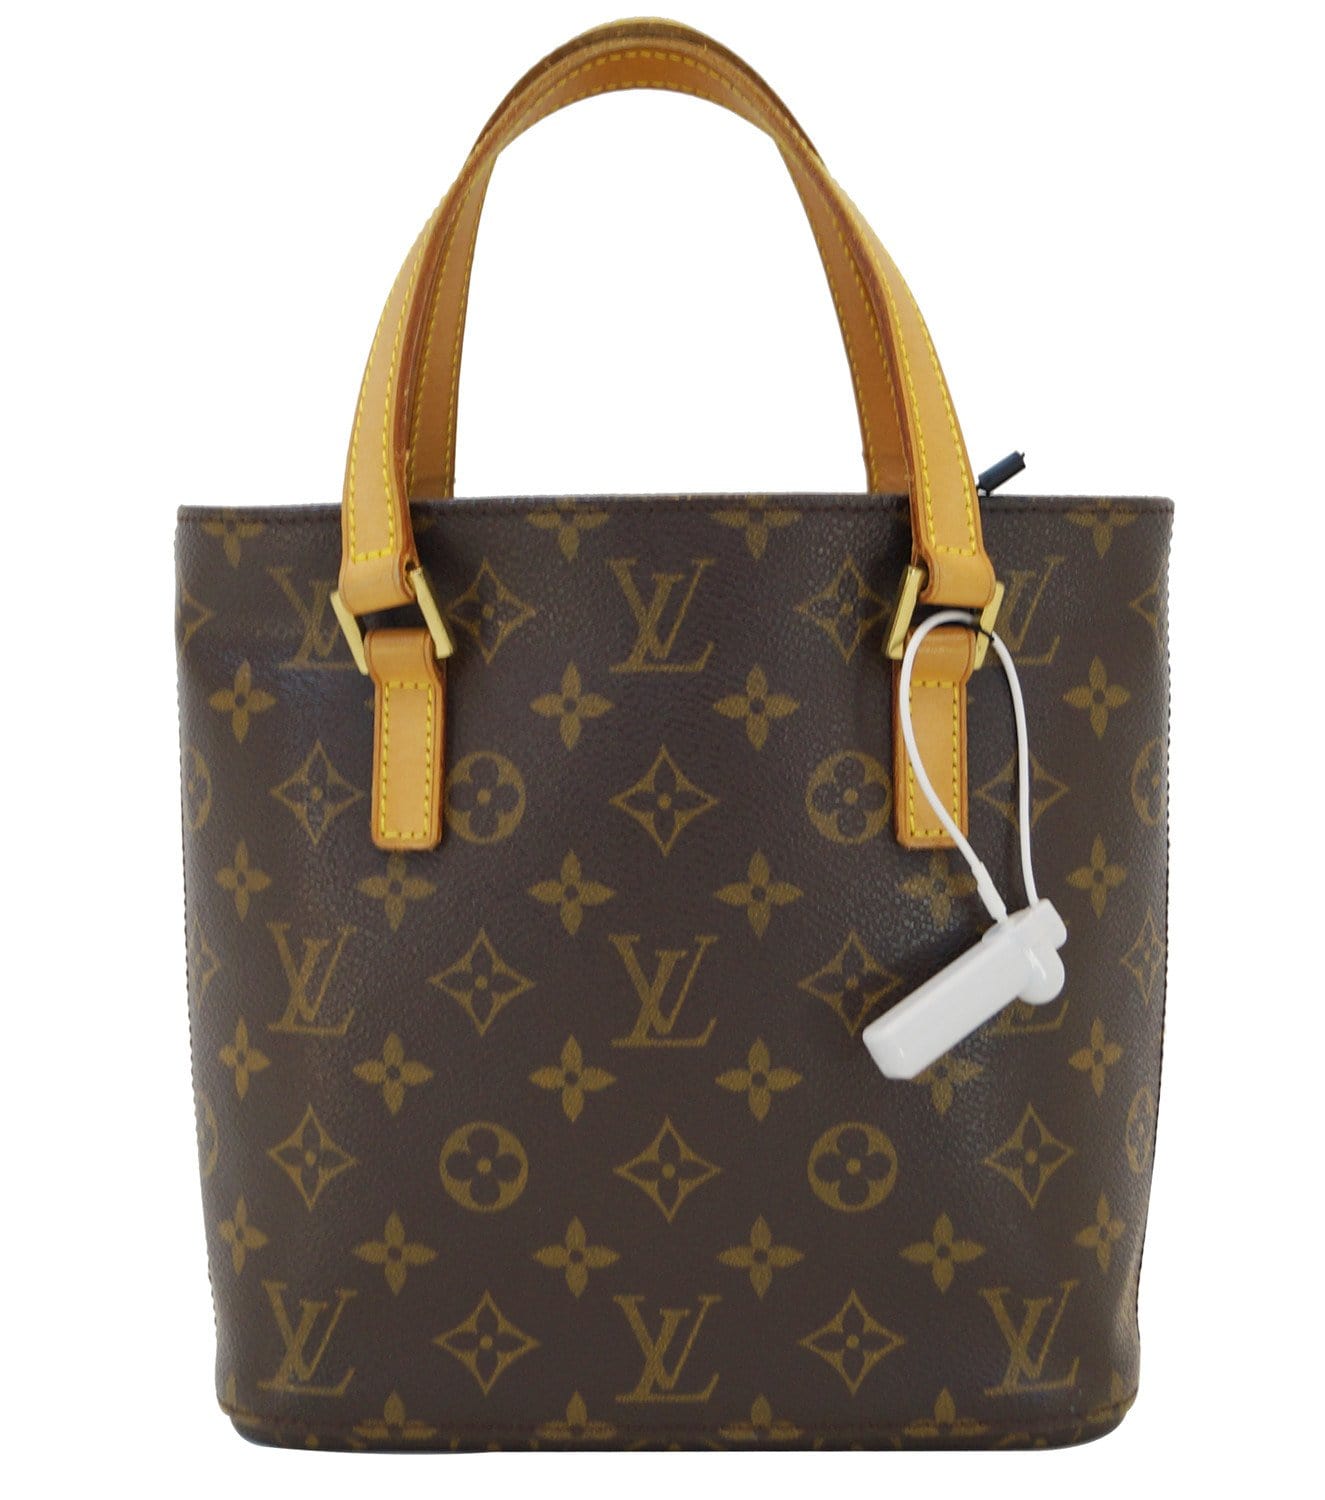 What Is Canvas In Louis Vuitton | IQS Executive